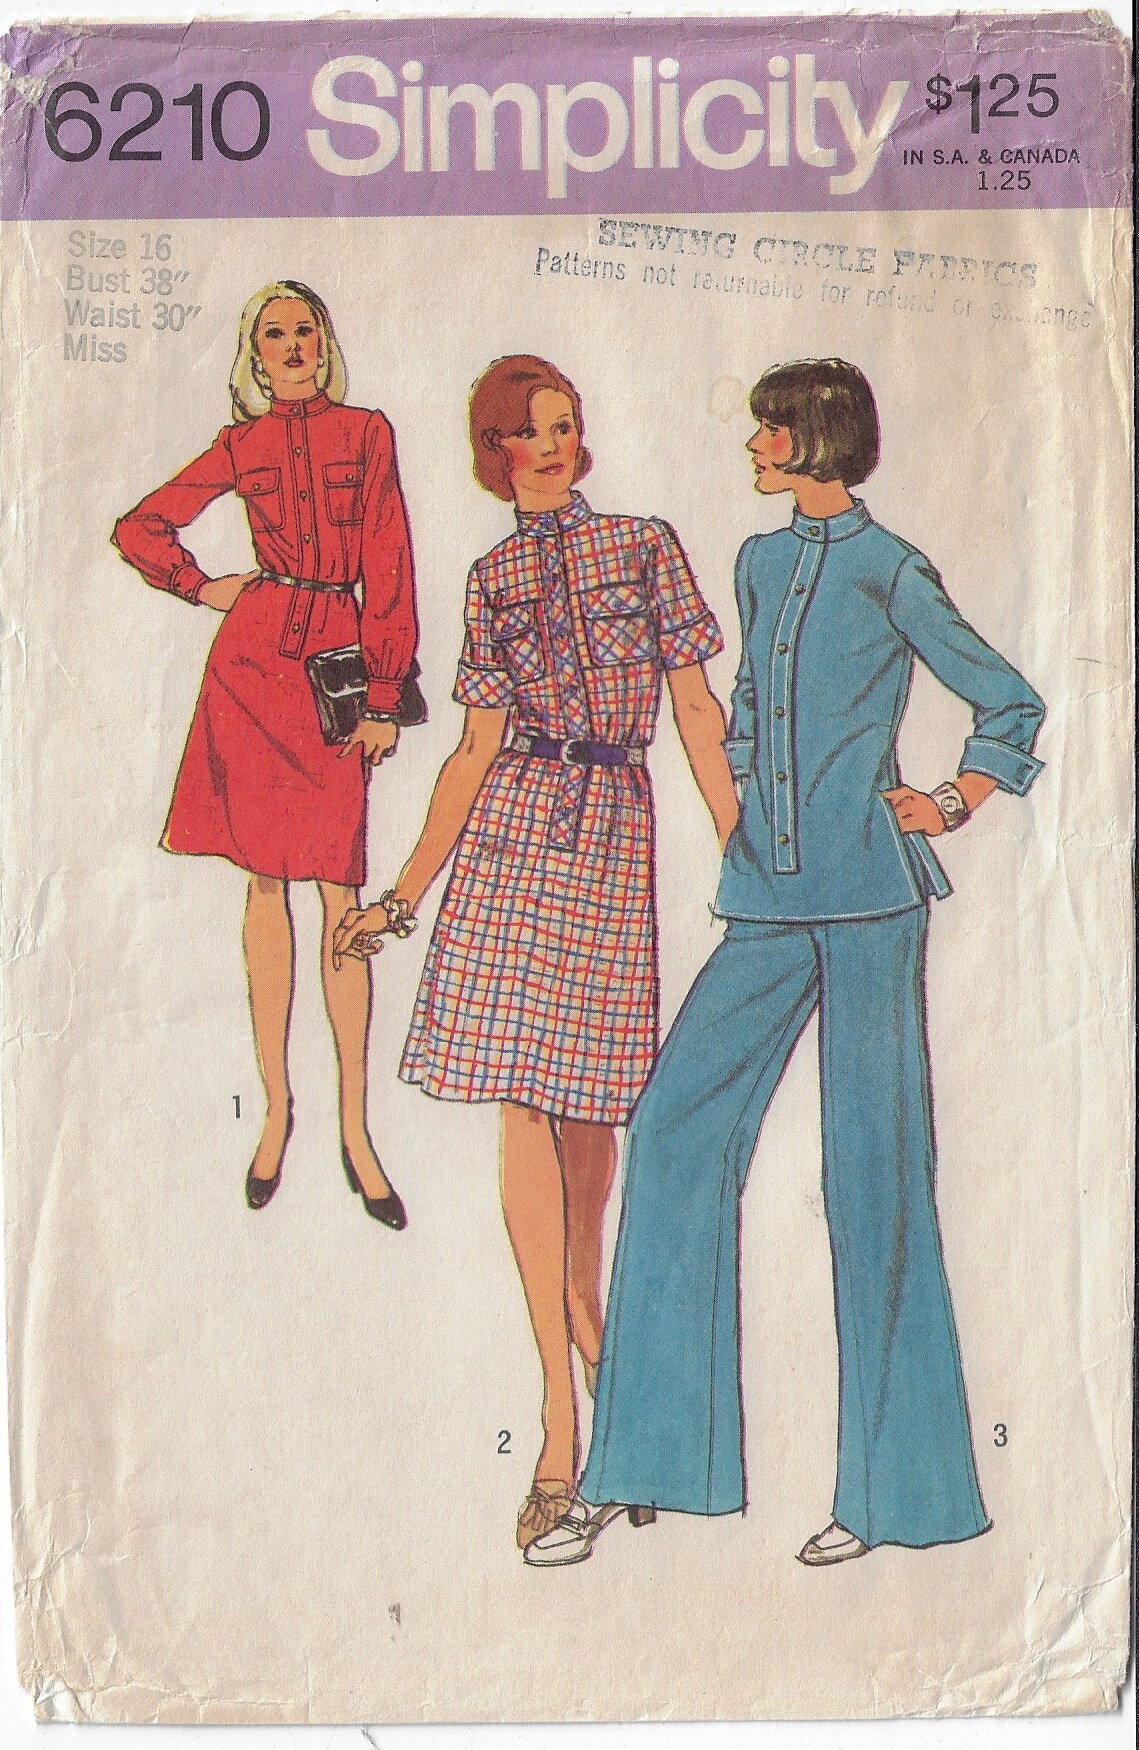 Simplicity 8881 Vintage 70's Sewing Pattern Mod V Neck Center Seam Fit &  Flared Mini Dress, Tunic Top & Pants Size 11/12